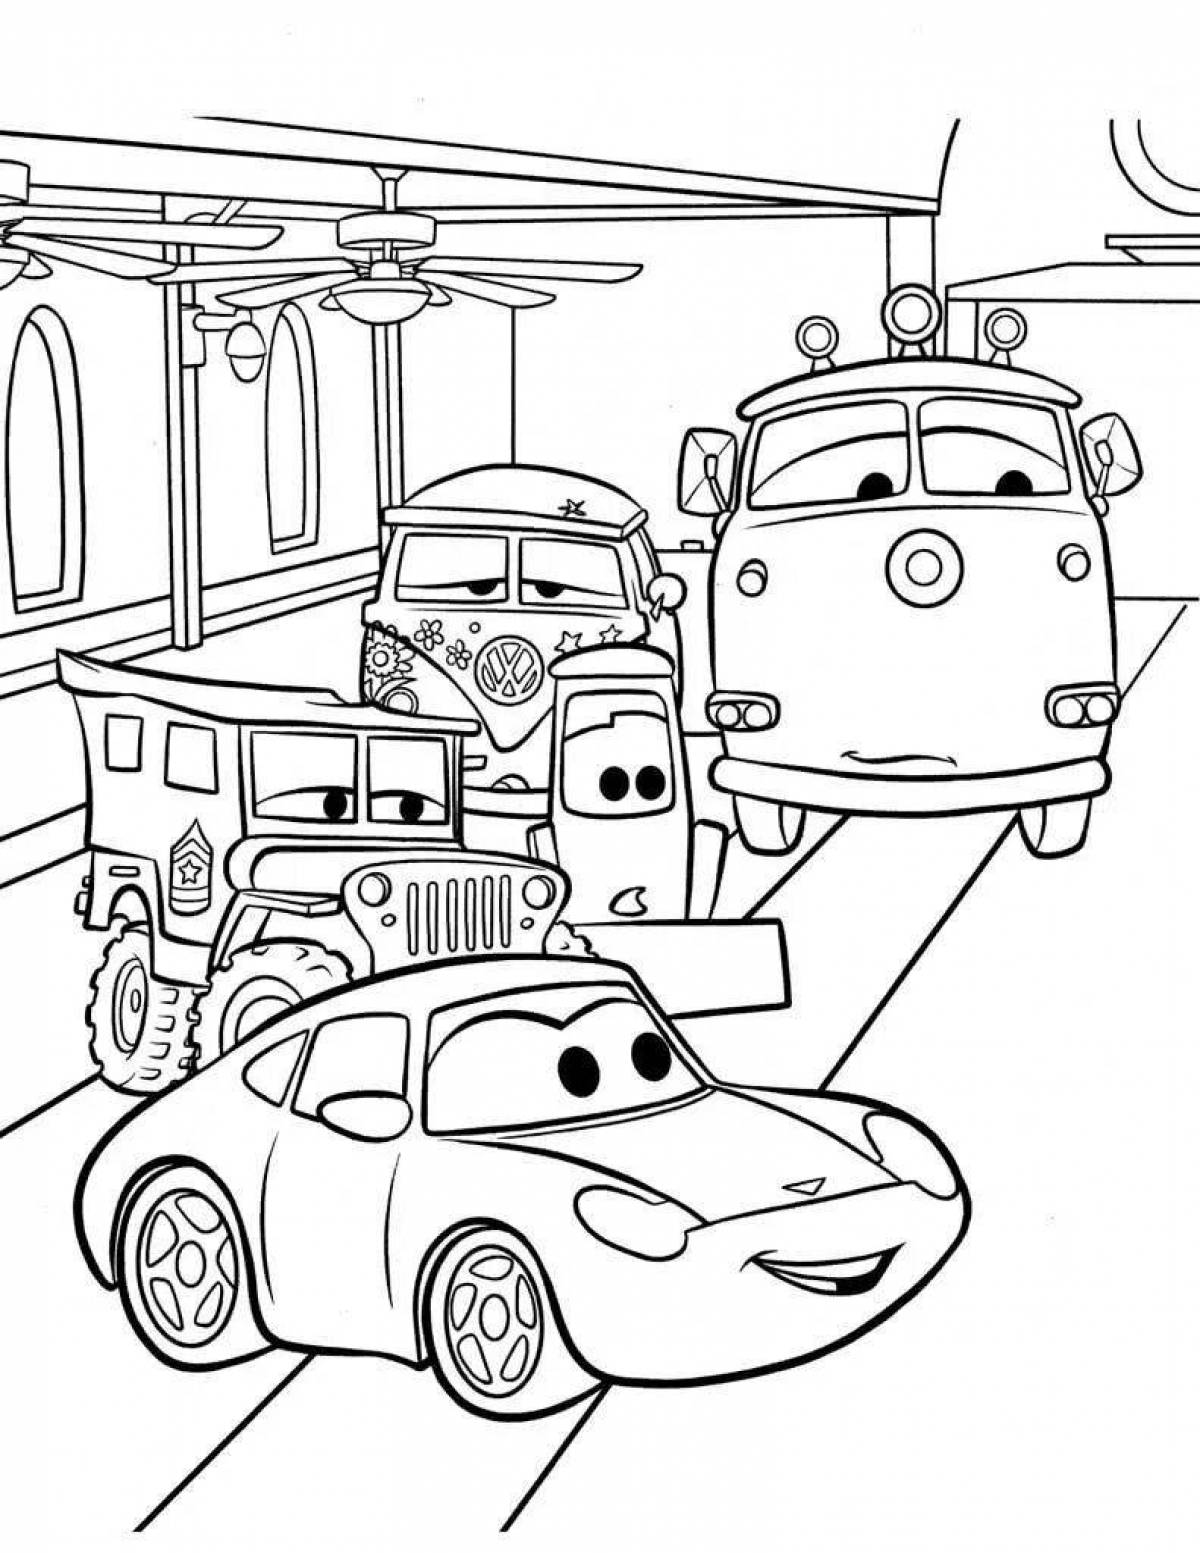 Adorable cartoon cars coloring book for kids